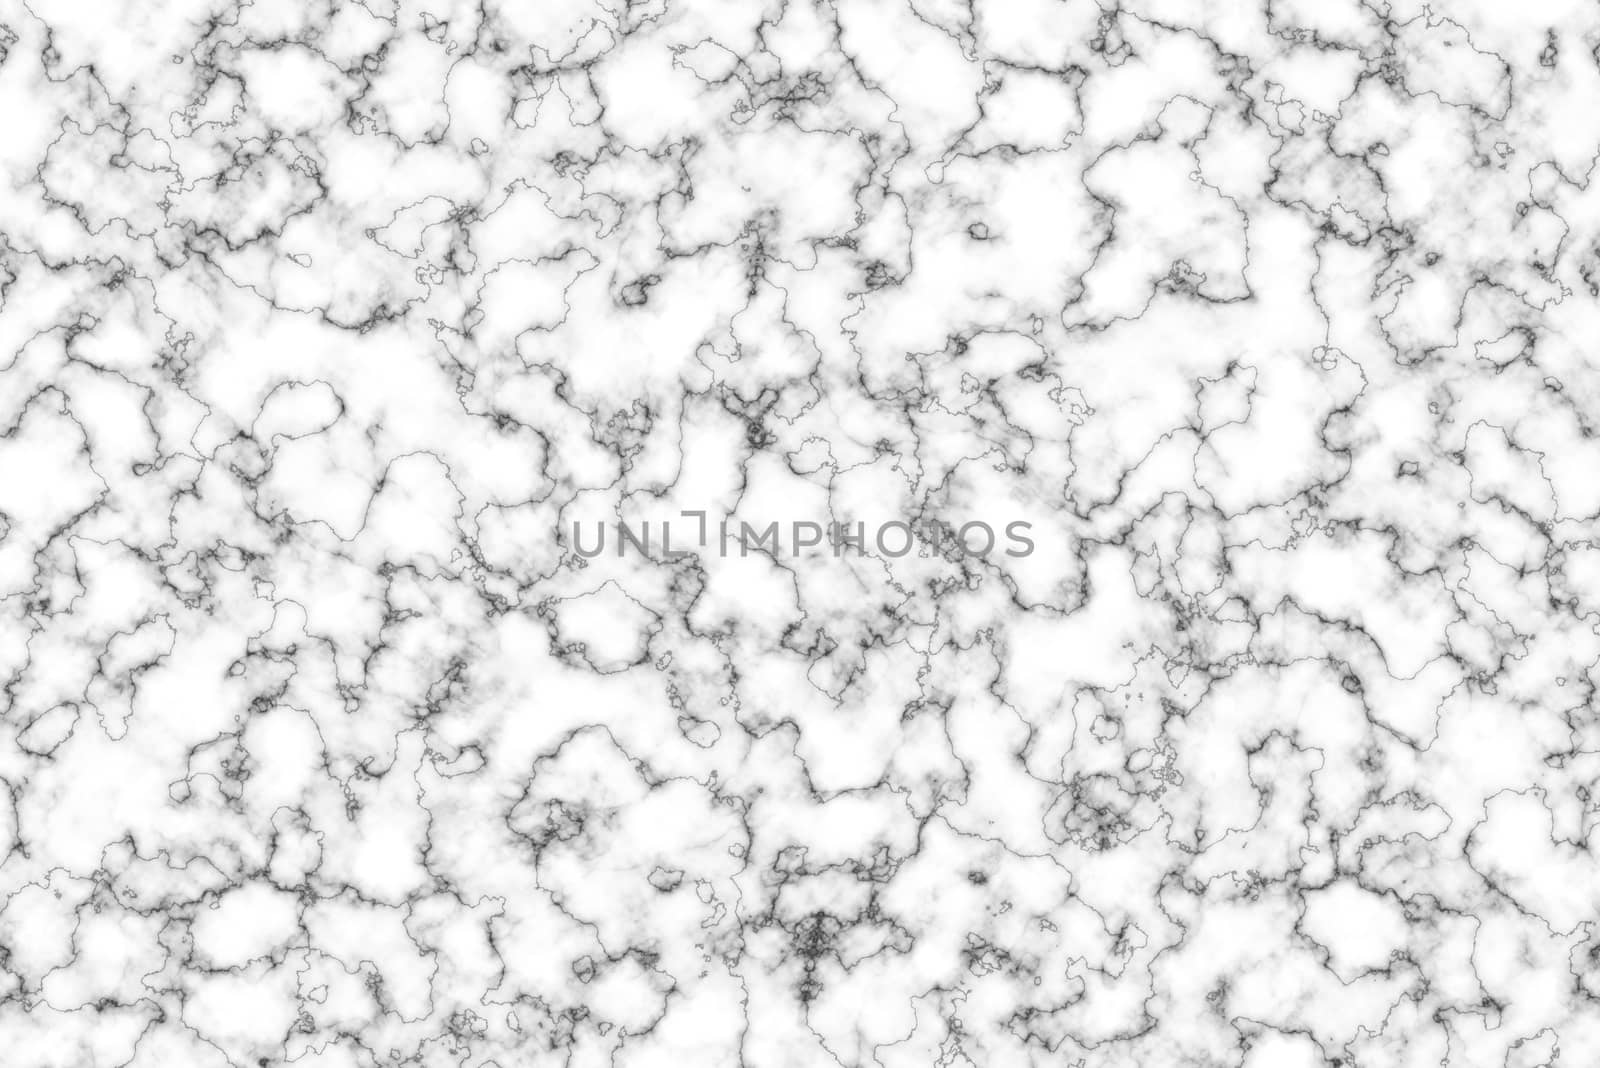 White marble abstract background and texture for pattern or product design